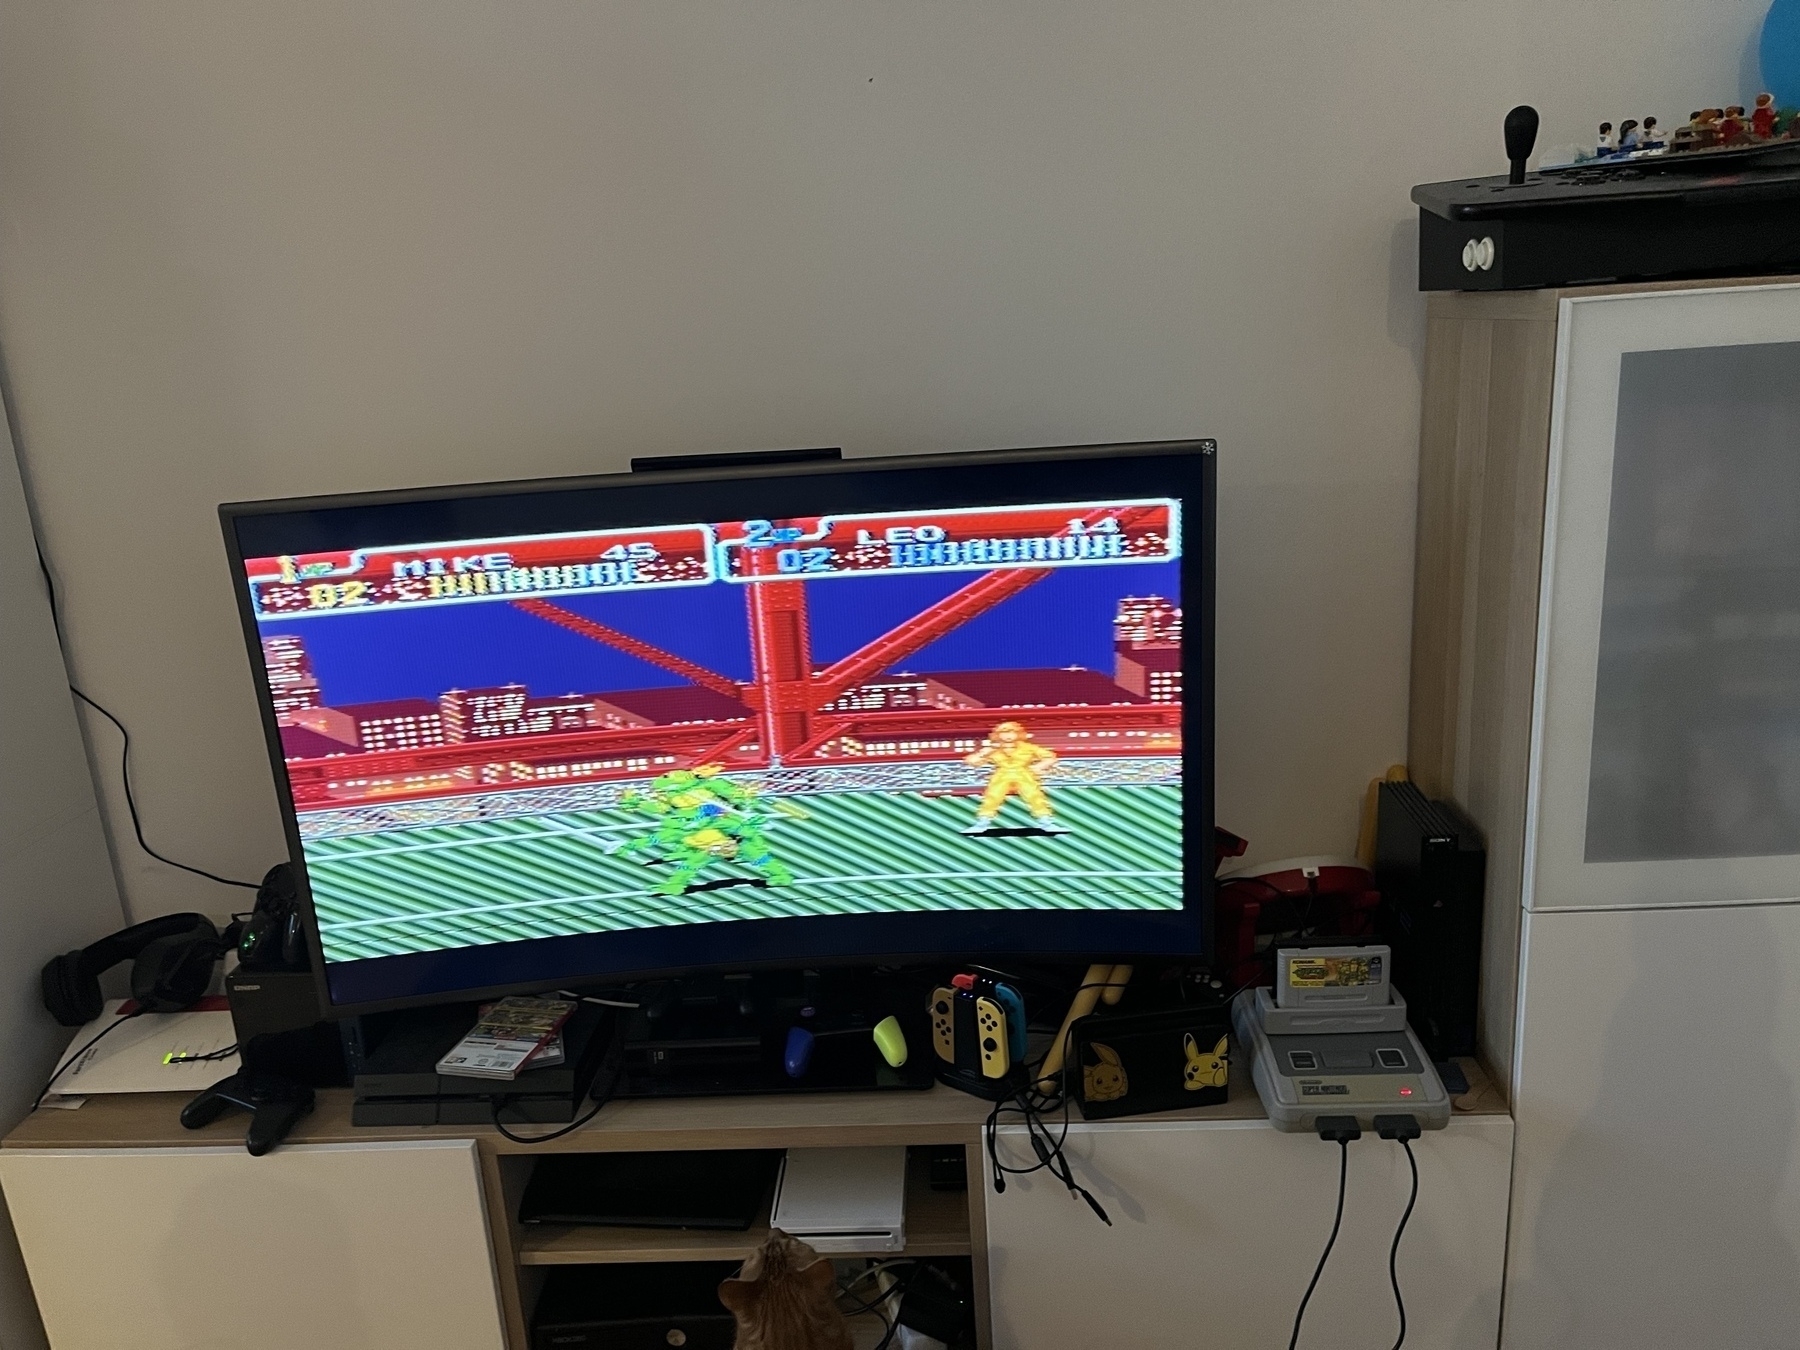 Turtles in Time playing on a SNES